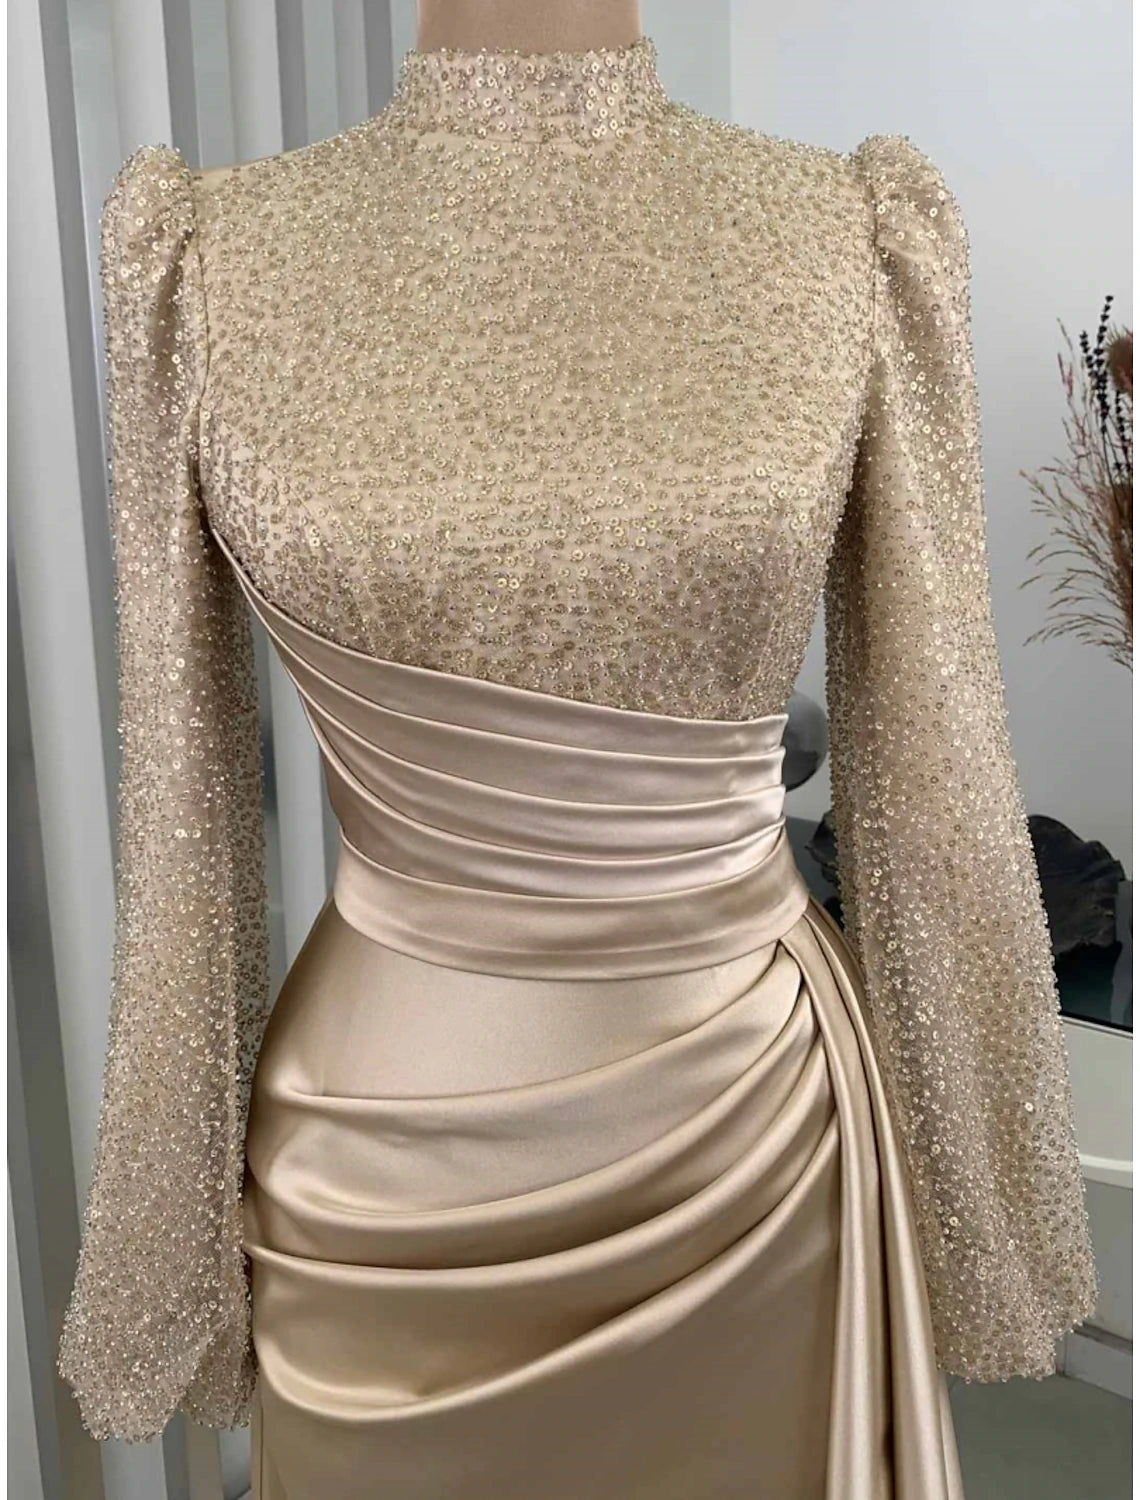 A-Line Evening Gown Champagne Christmas Elegant Dress Formal Sweep / Brush Train Long Sleeve High Neck Satin with Glitter